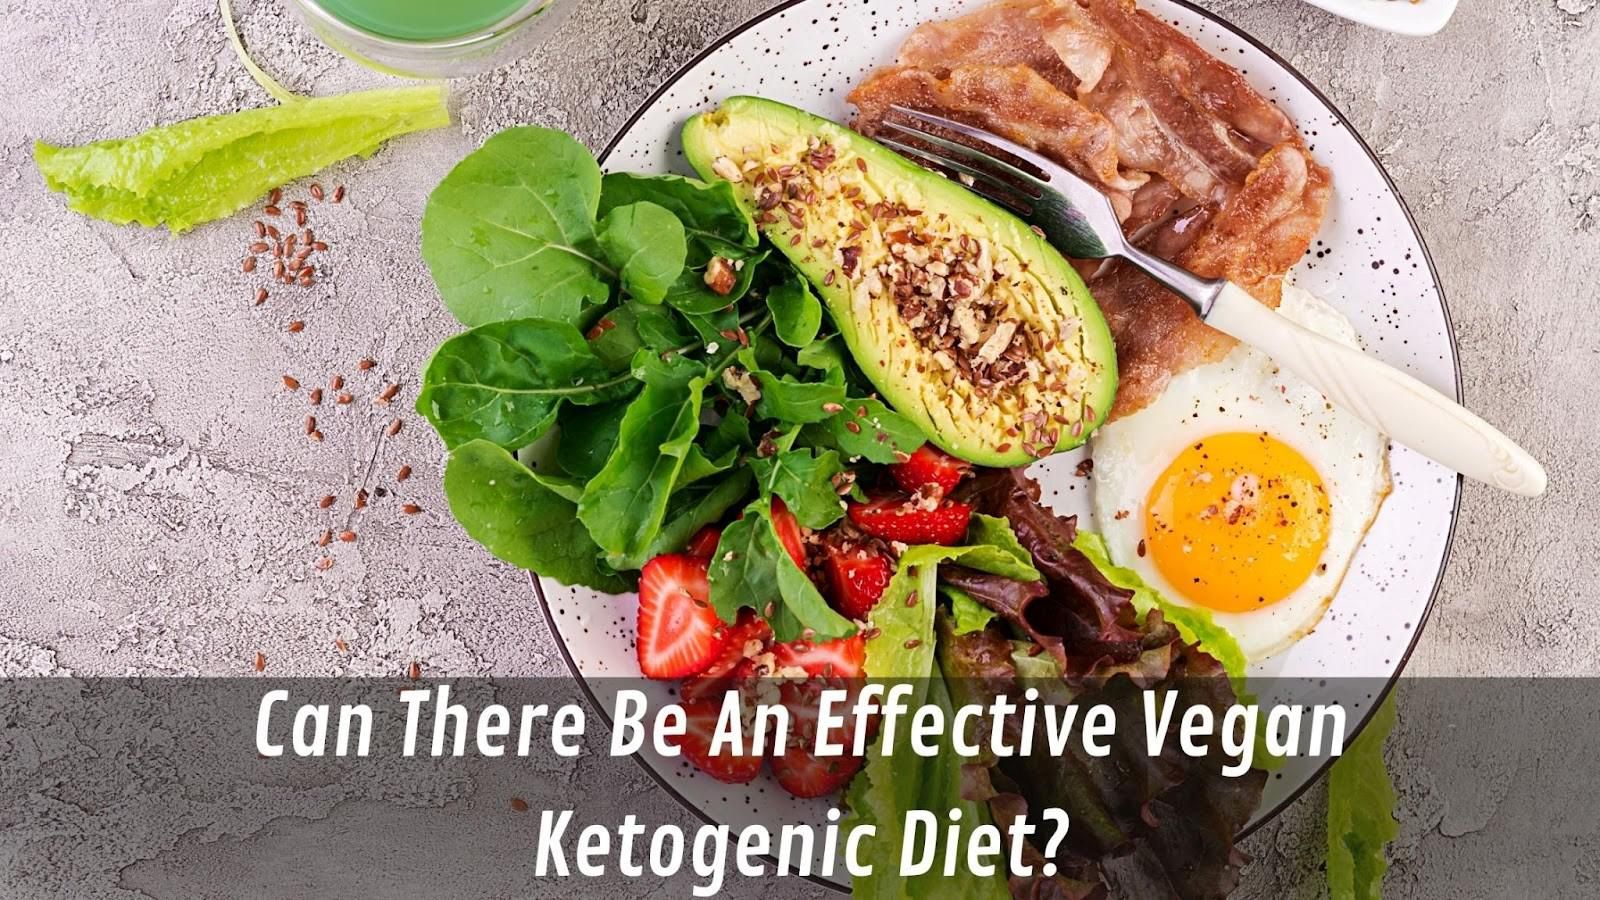 Can There Be An Effective Vegan Ketogenic Diet?